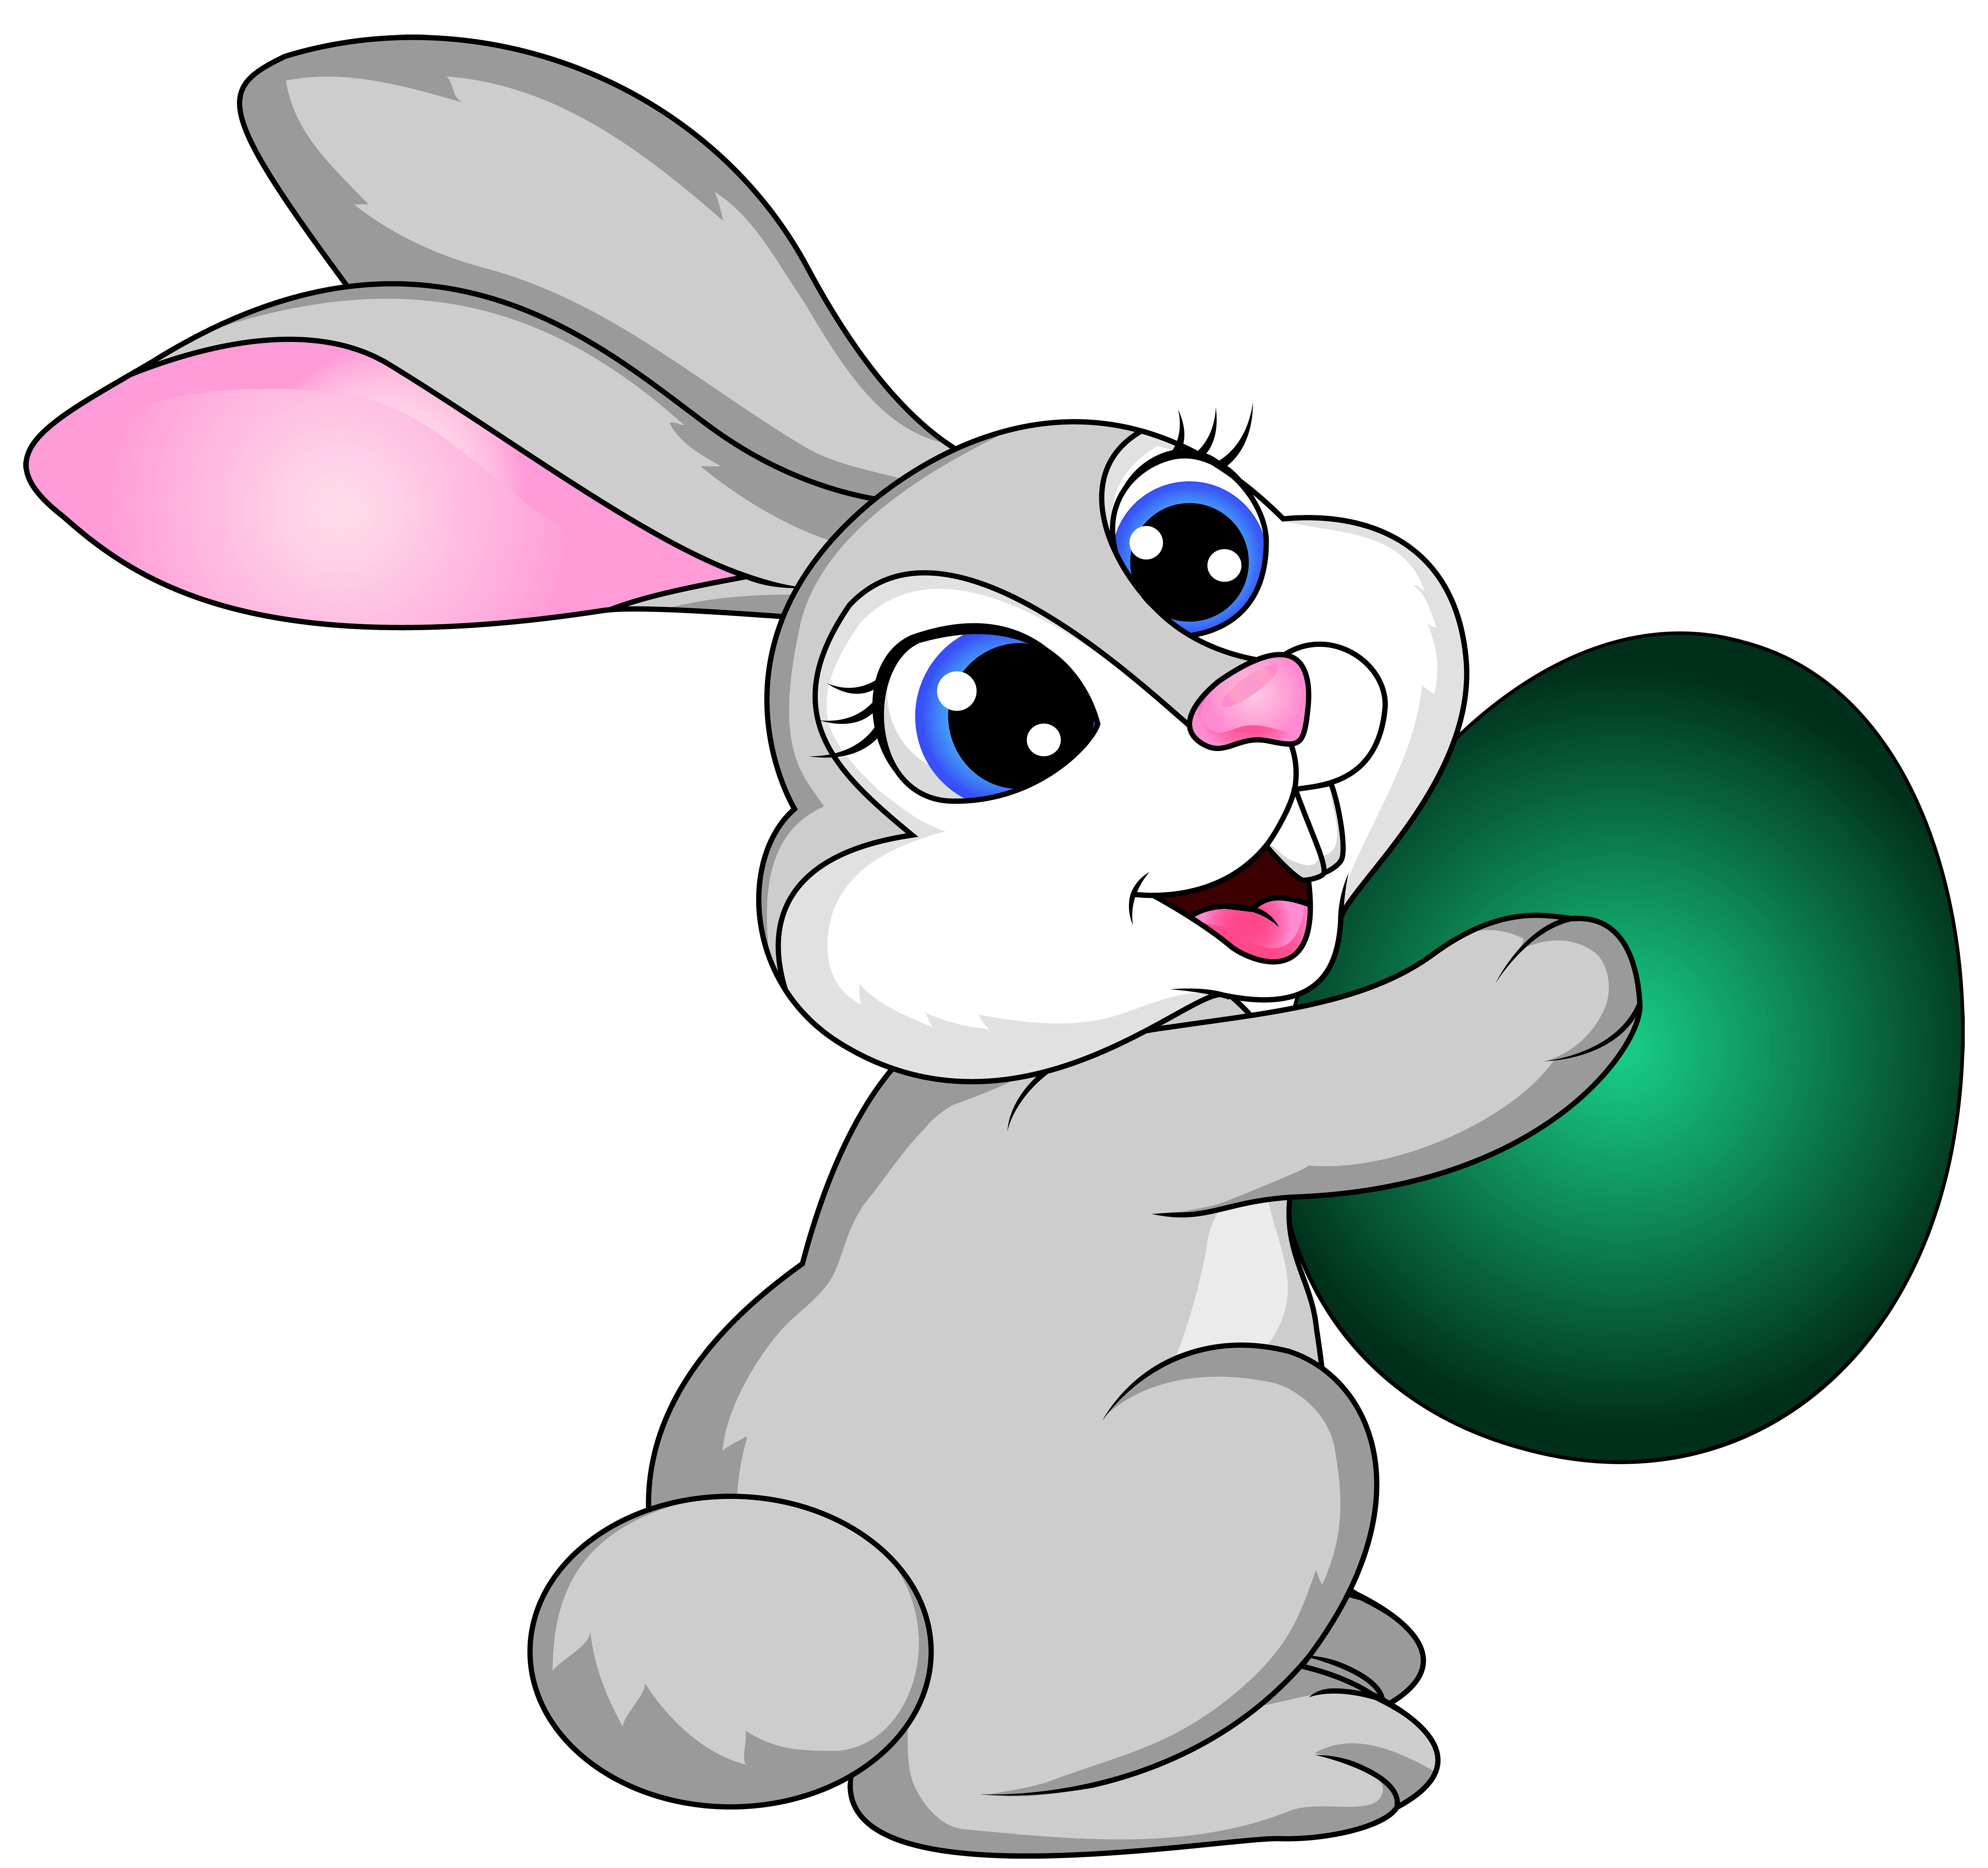 Free Bunny Clipart Transparent Background, Download Free Clip Art